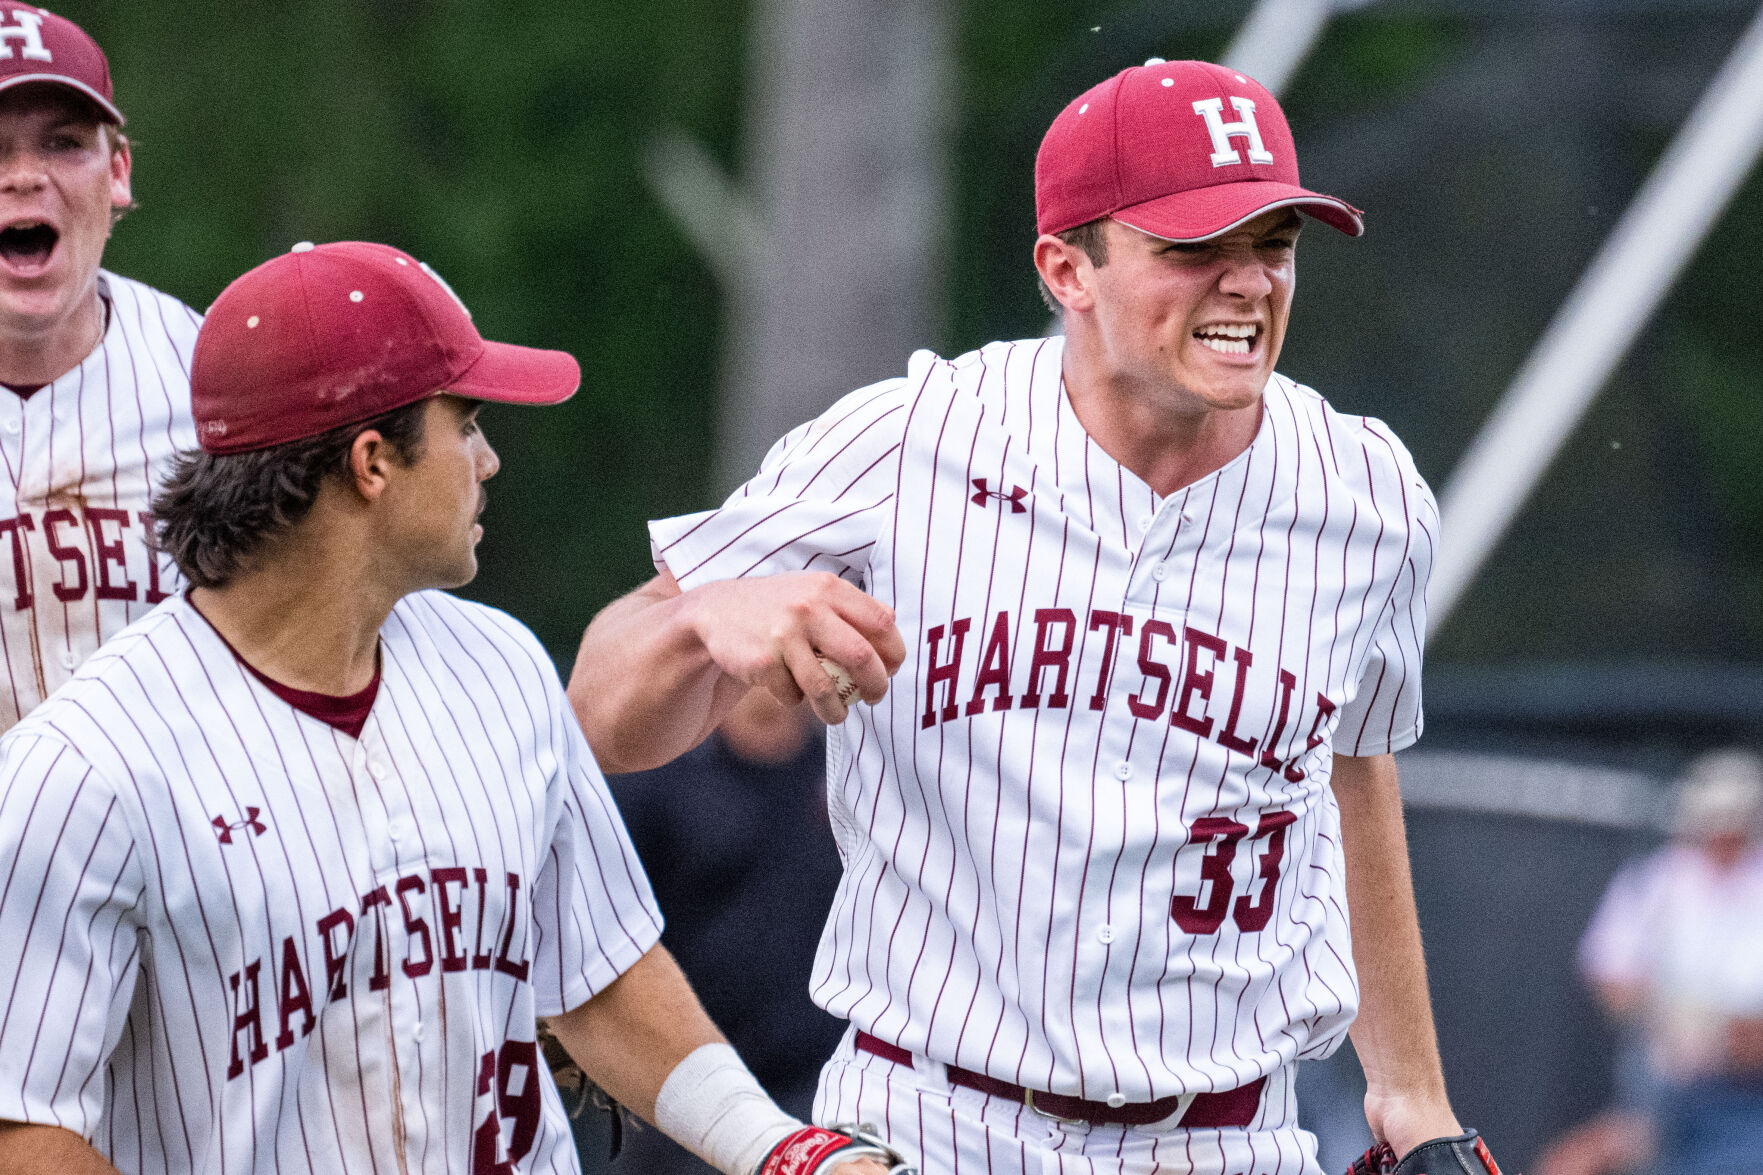 Dominant pitching lifts Hartselle to state semifinals